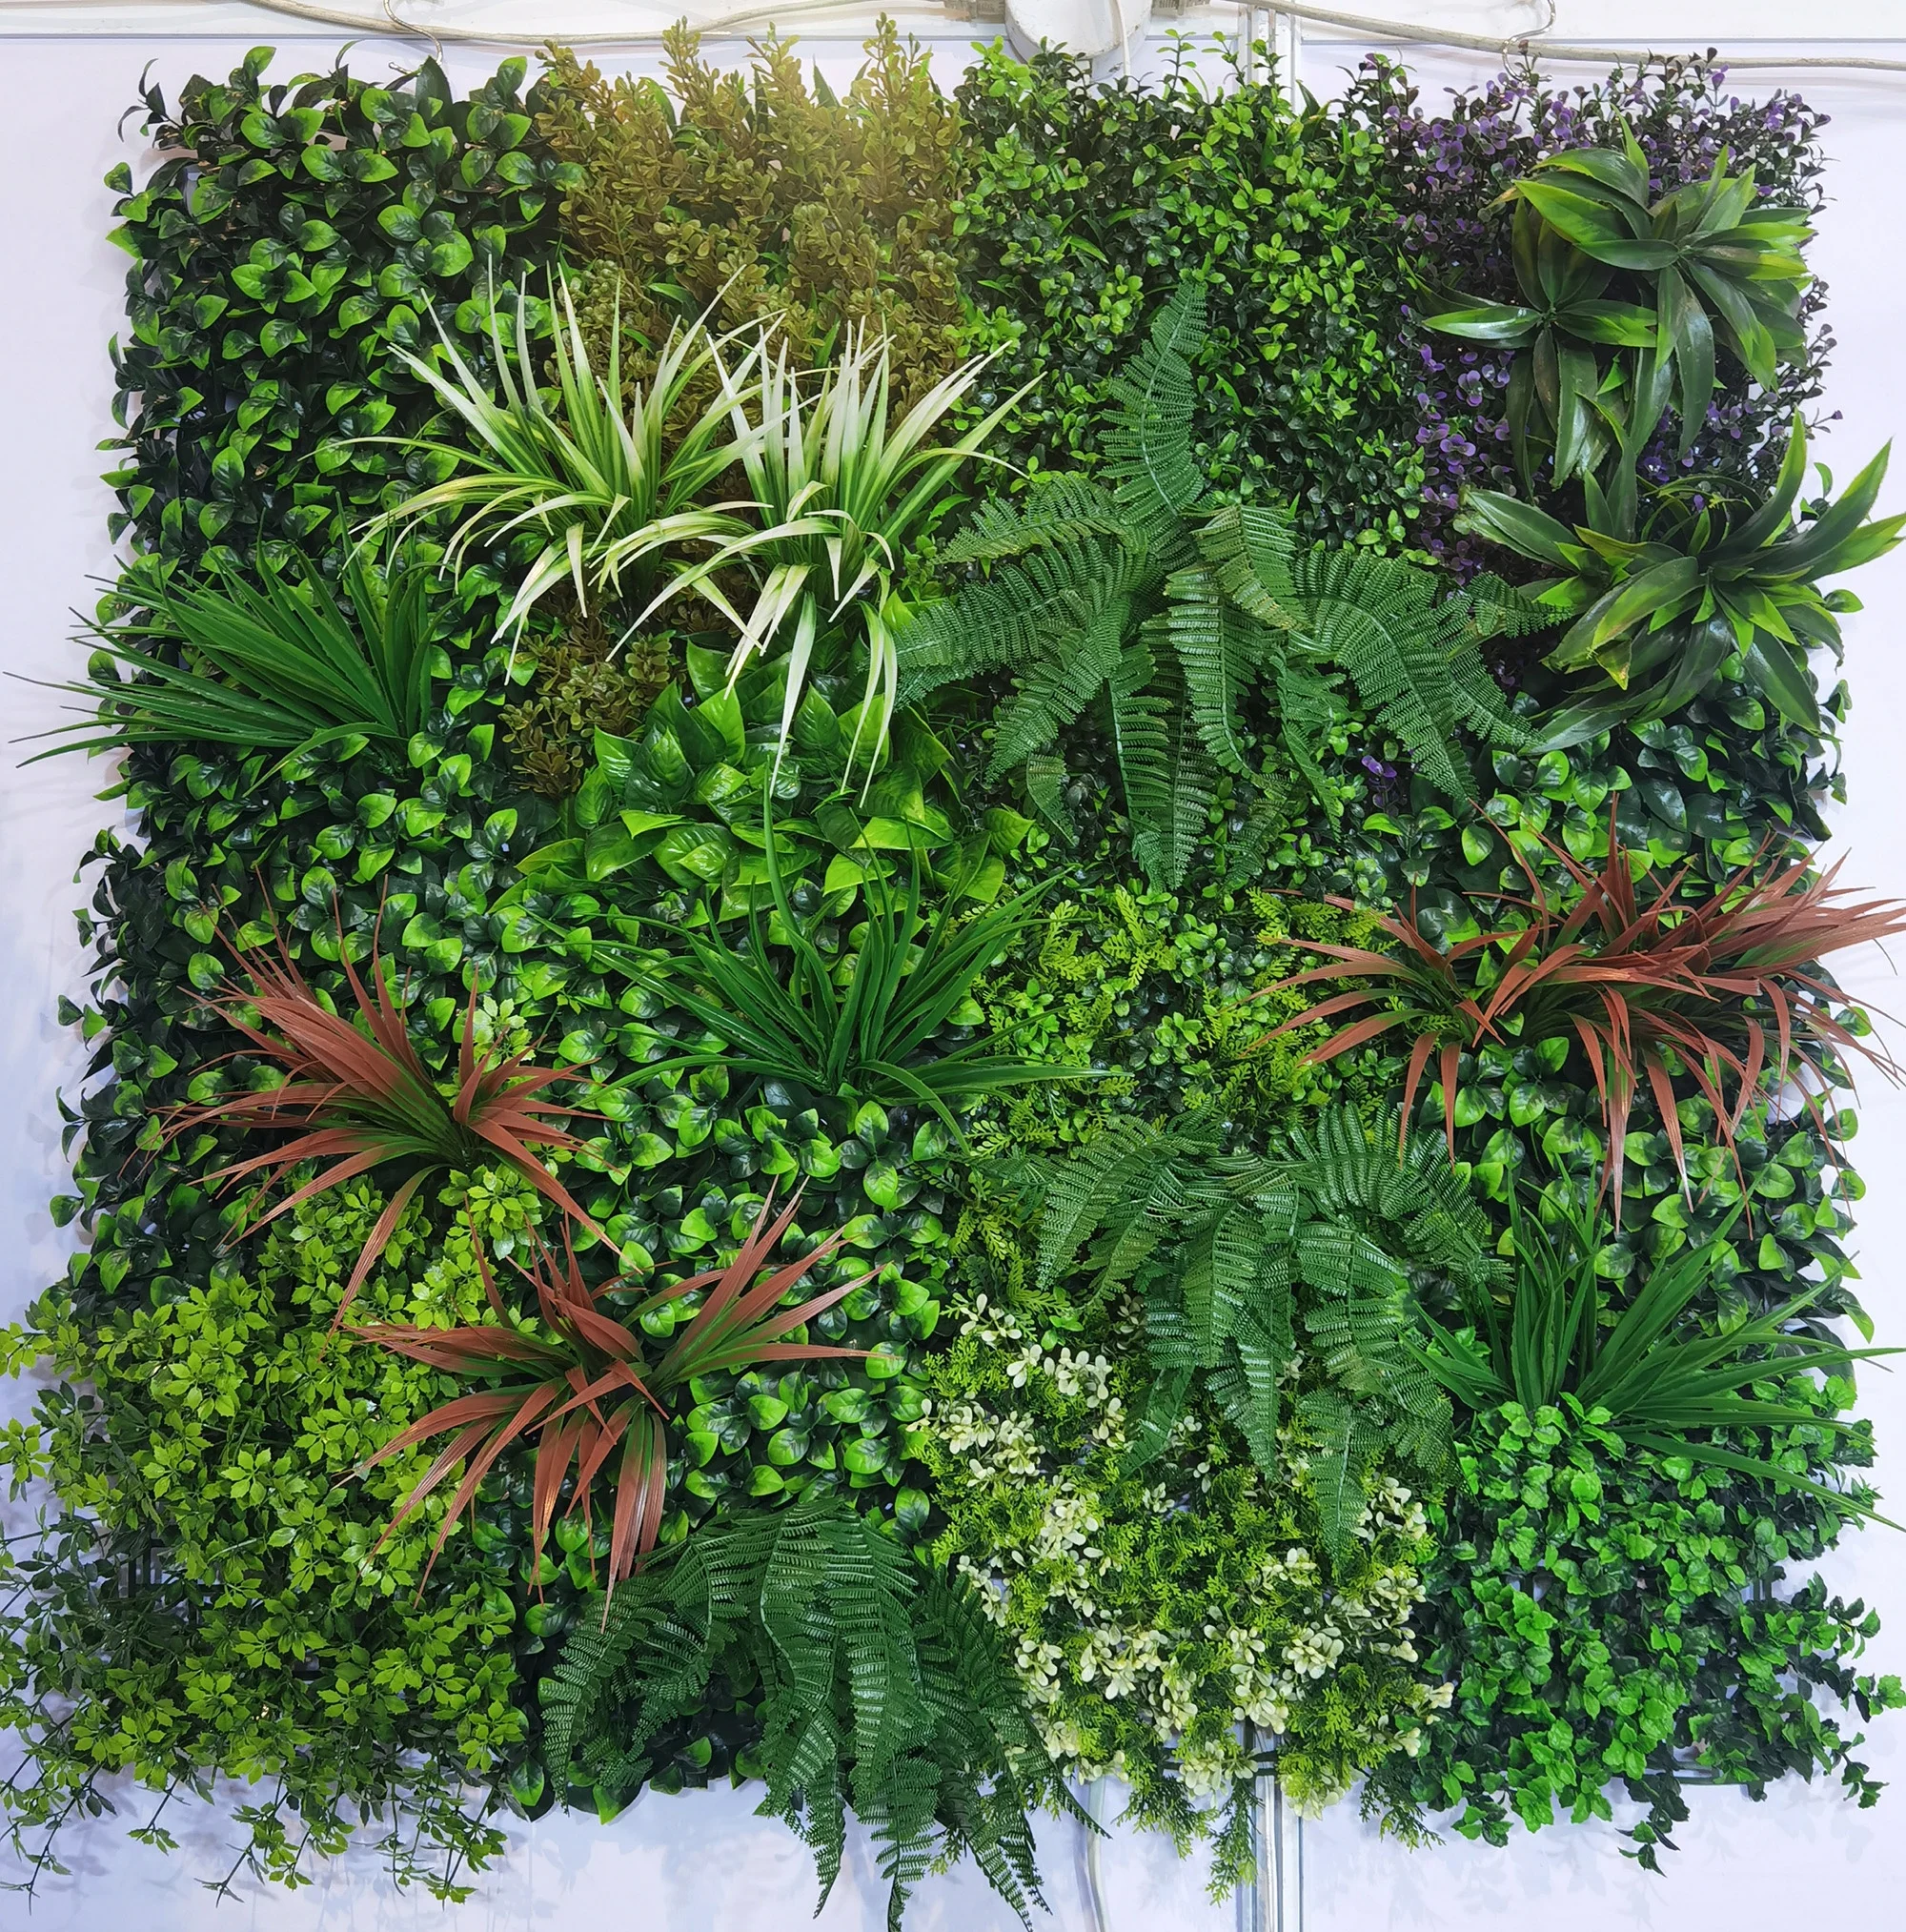 

O-G003 Customized Evergreen Artificial Plants Grass Wall Tropical Jungle Style Fake Plant Greenery Backdrop Hang Plant Wall